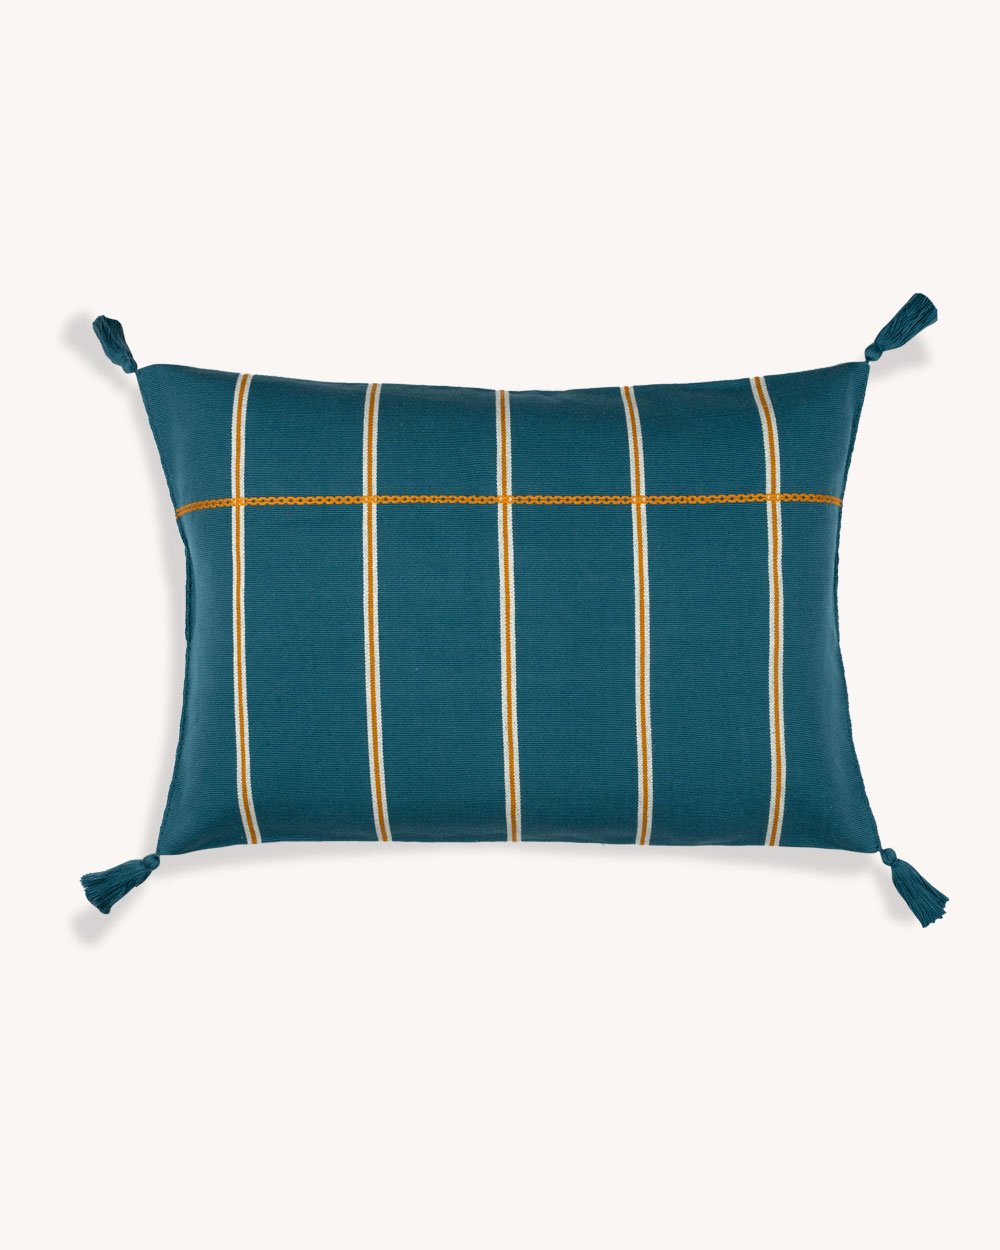 Routes-rayas-stripe-cushion-teal-front.jpg